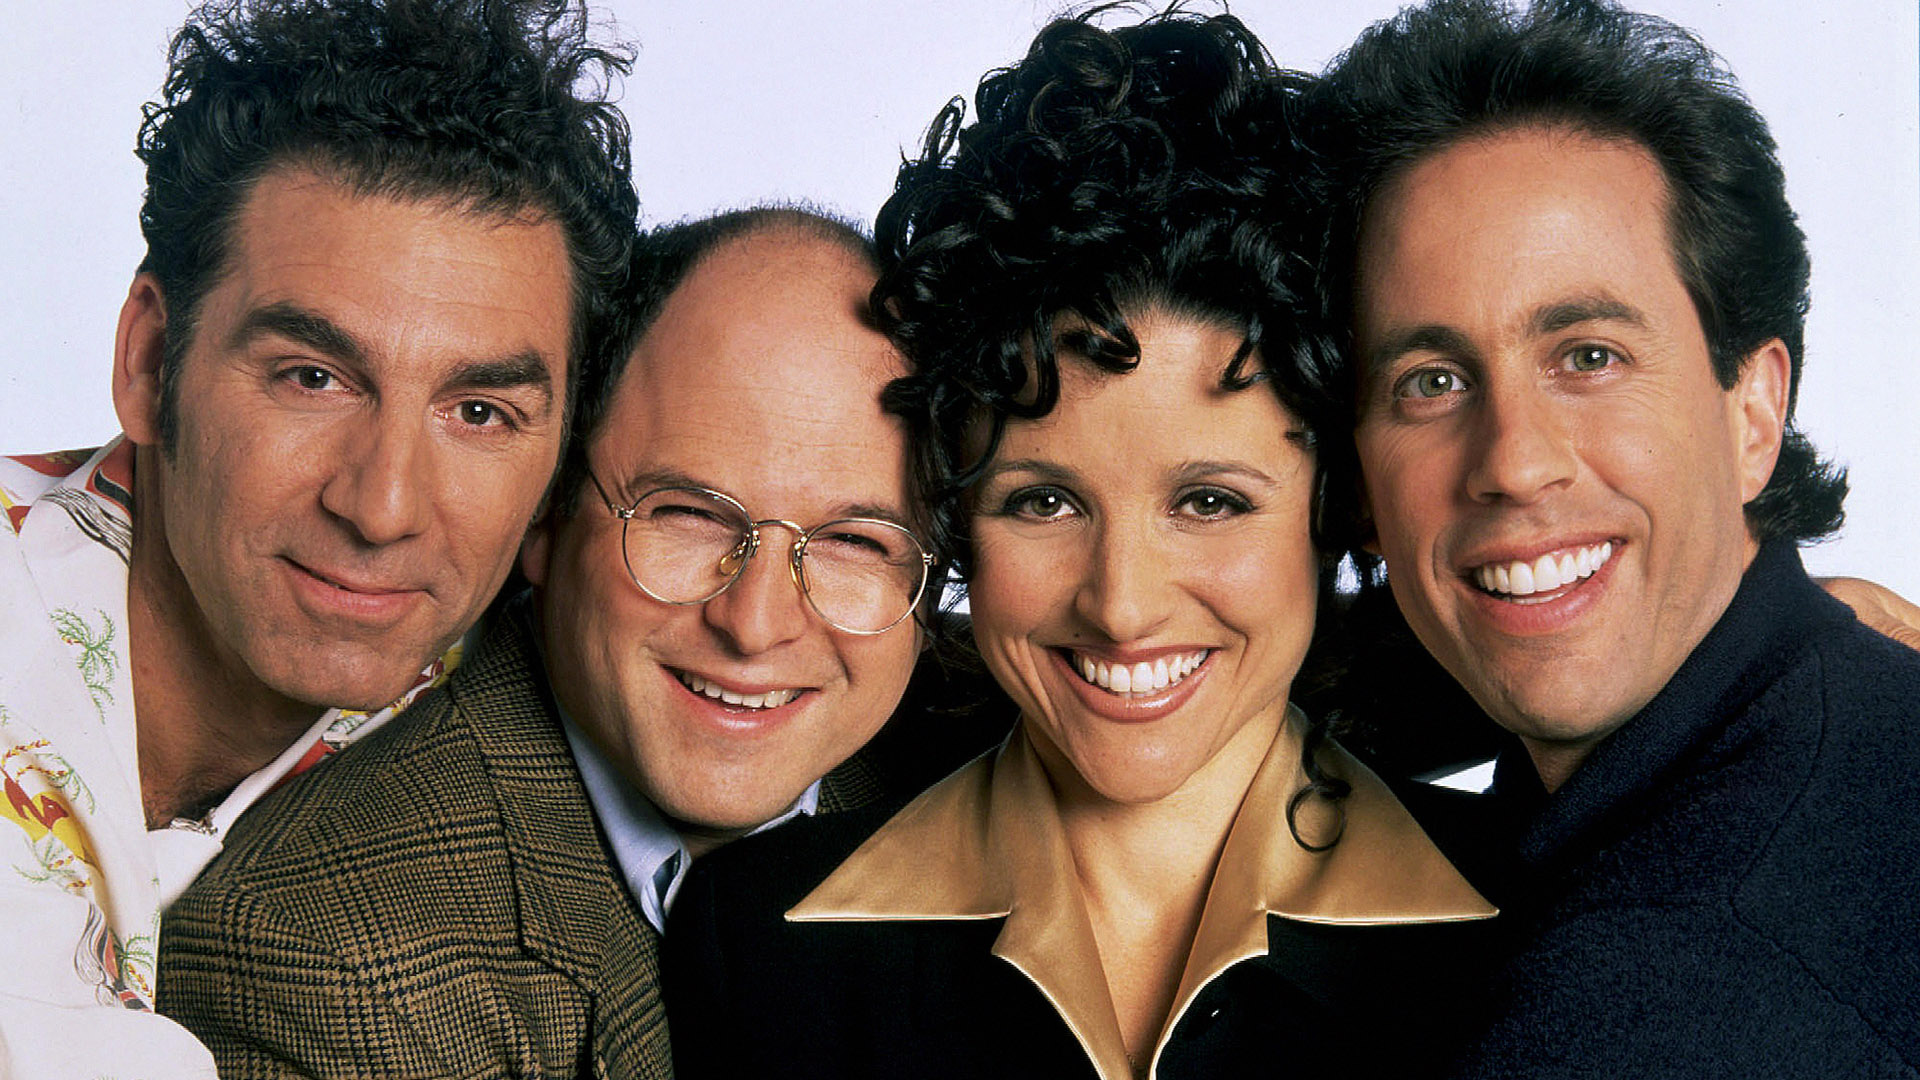 These 3 Shows Considered the Funniest Sitcoms of All Time by Reddit